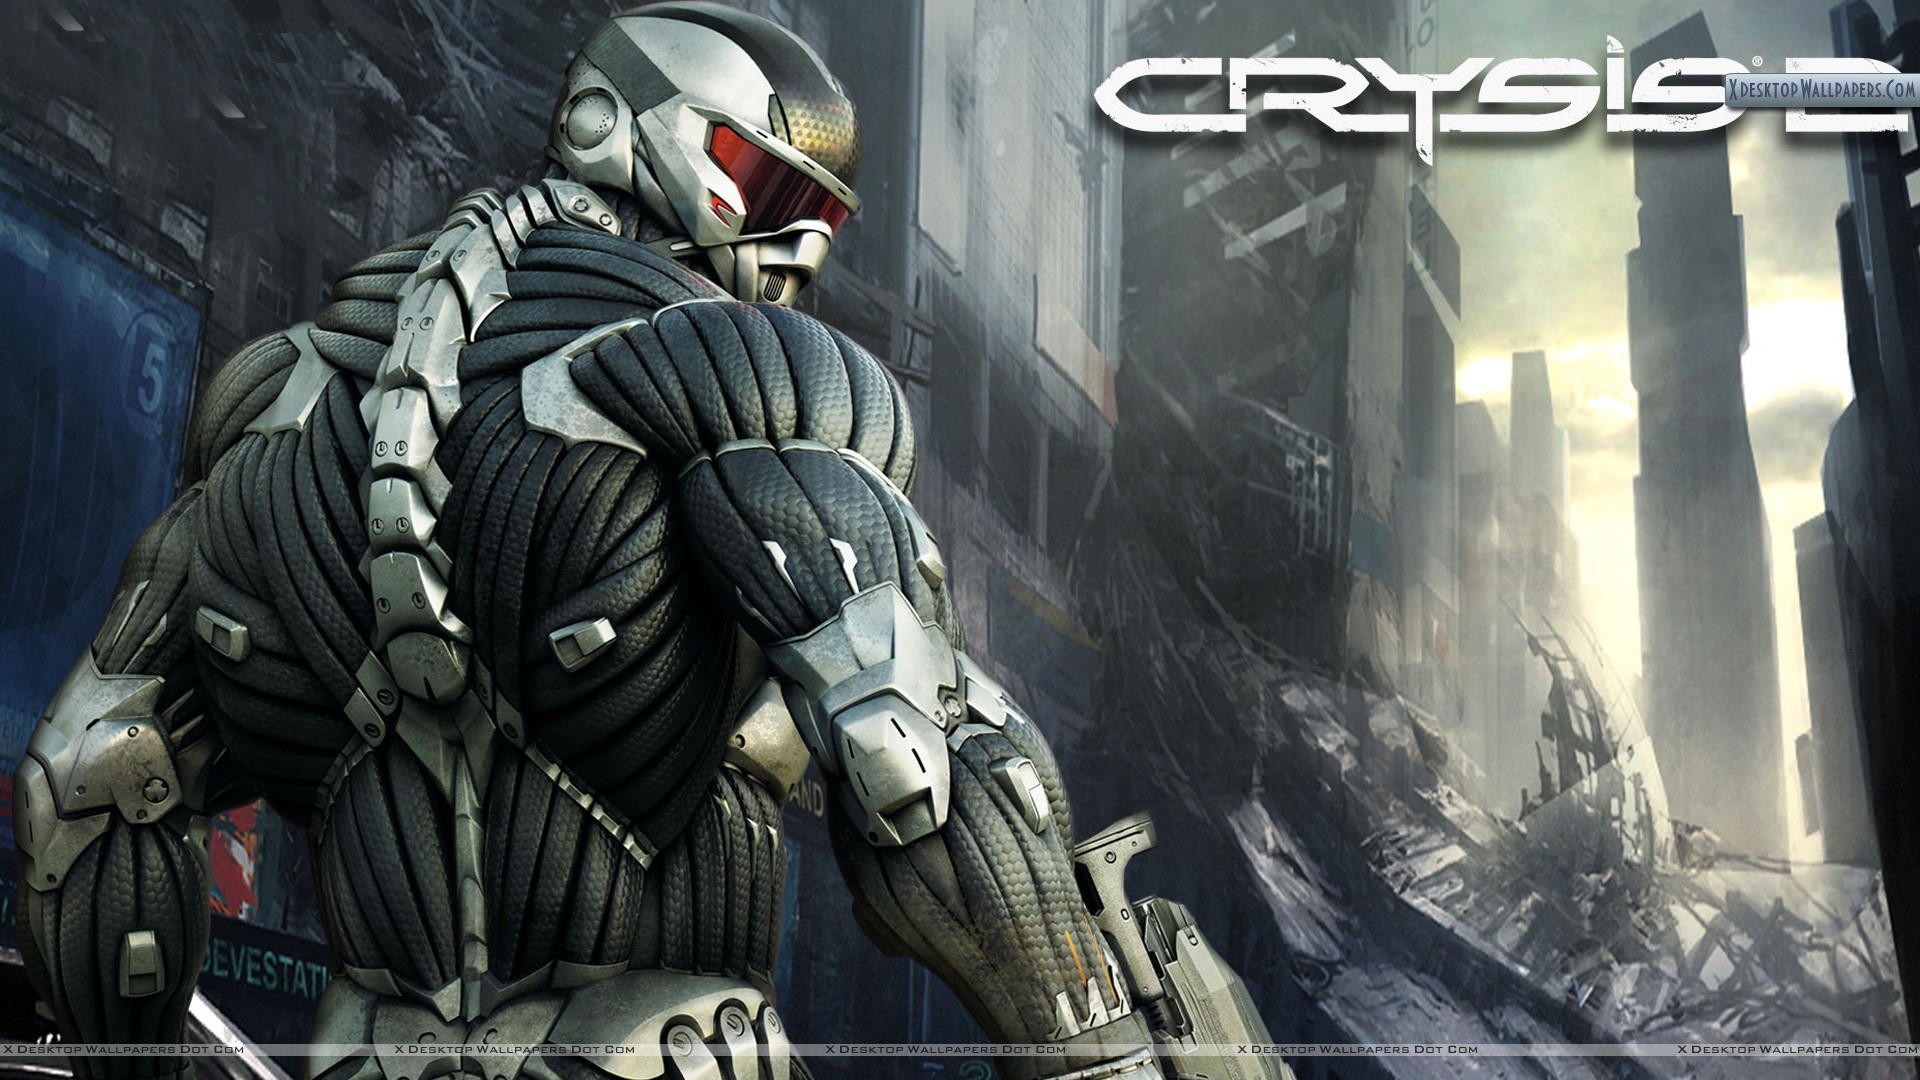 1920x1080, You Are Viewing Wallpaper Titled Crysis - Crysis 2 Wallpaper Hd - HD Wallpaper 